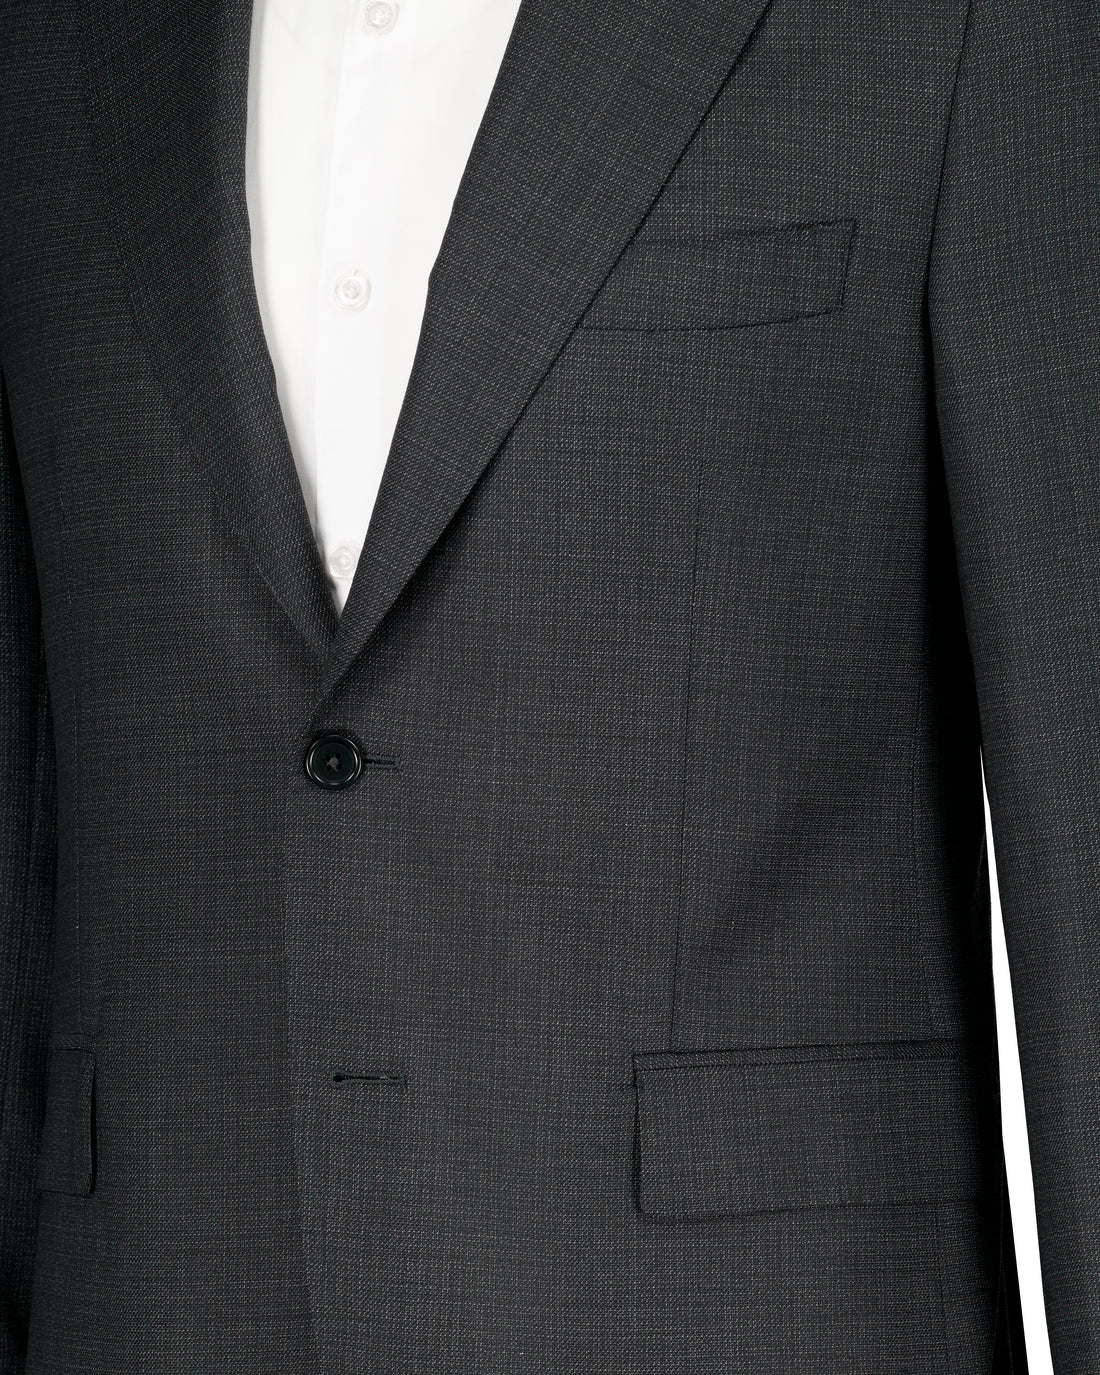 Marco Zegna Cloth Suit - Dark Charcoal - Made in Italy